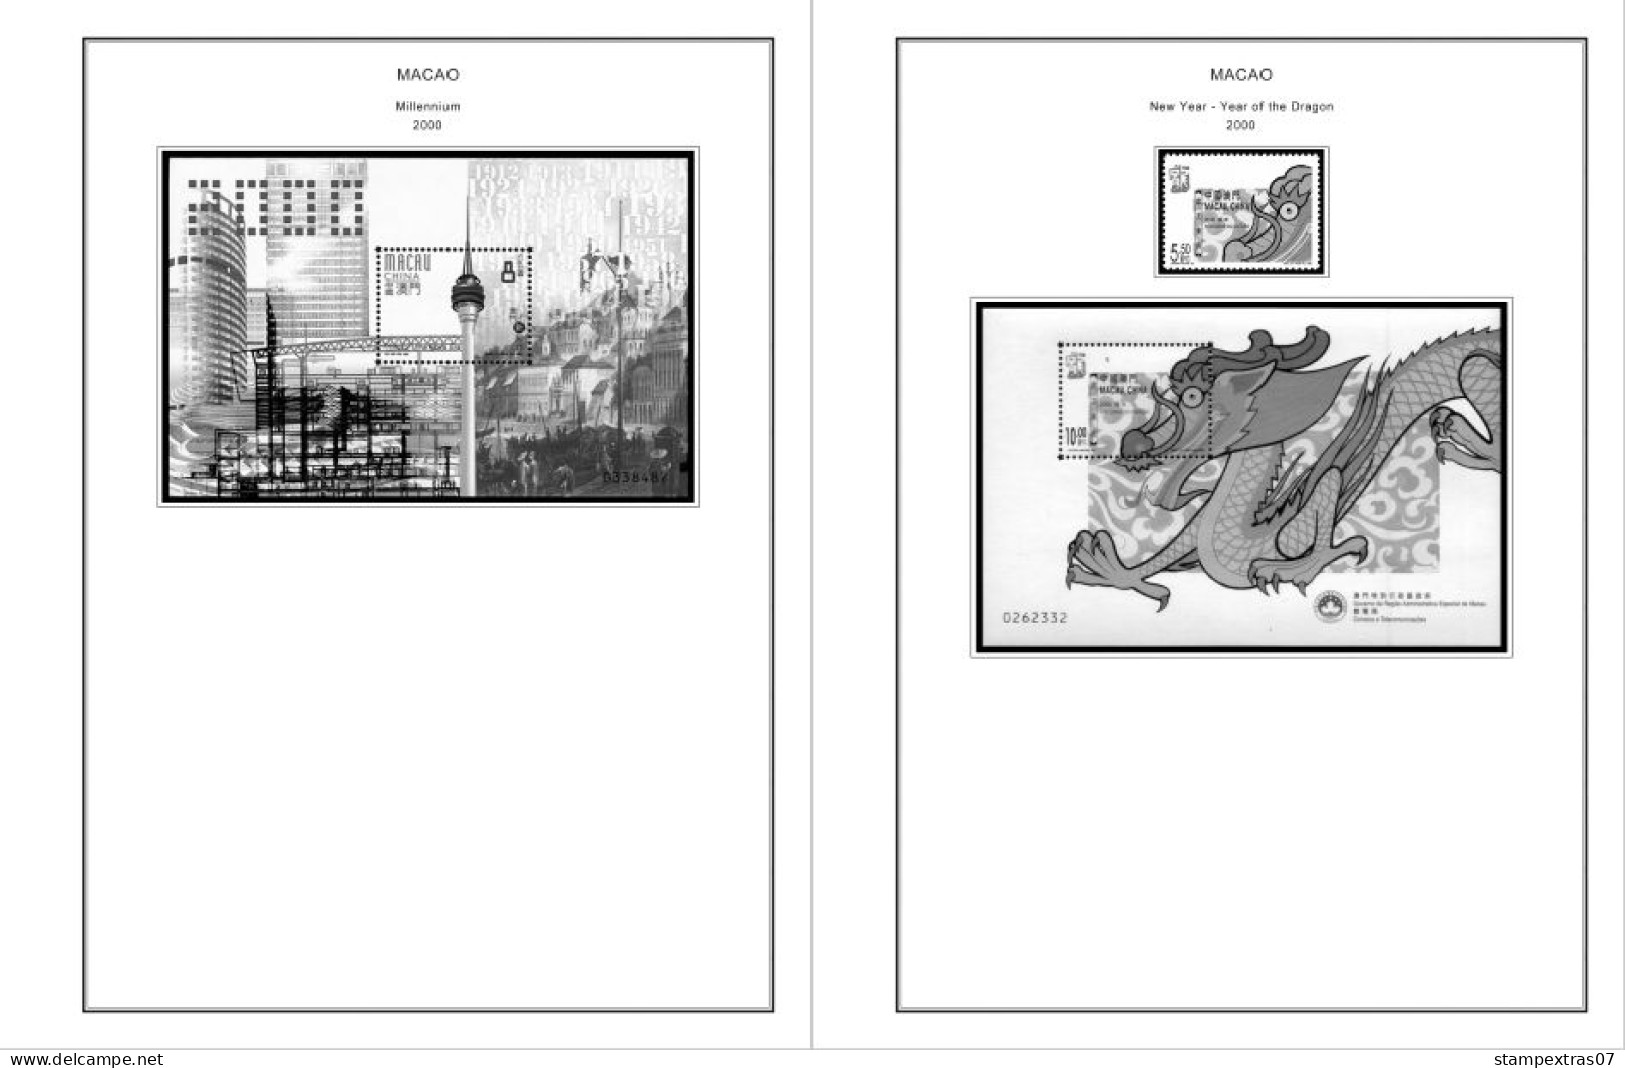 MACAO [SAR] 1999-2010 + 2011-2020 STAMP ALBUM PAGES (248 B&w Illustrated Pages) - Inglés